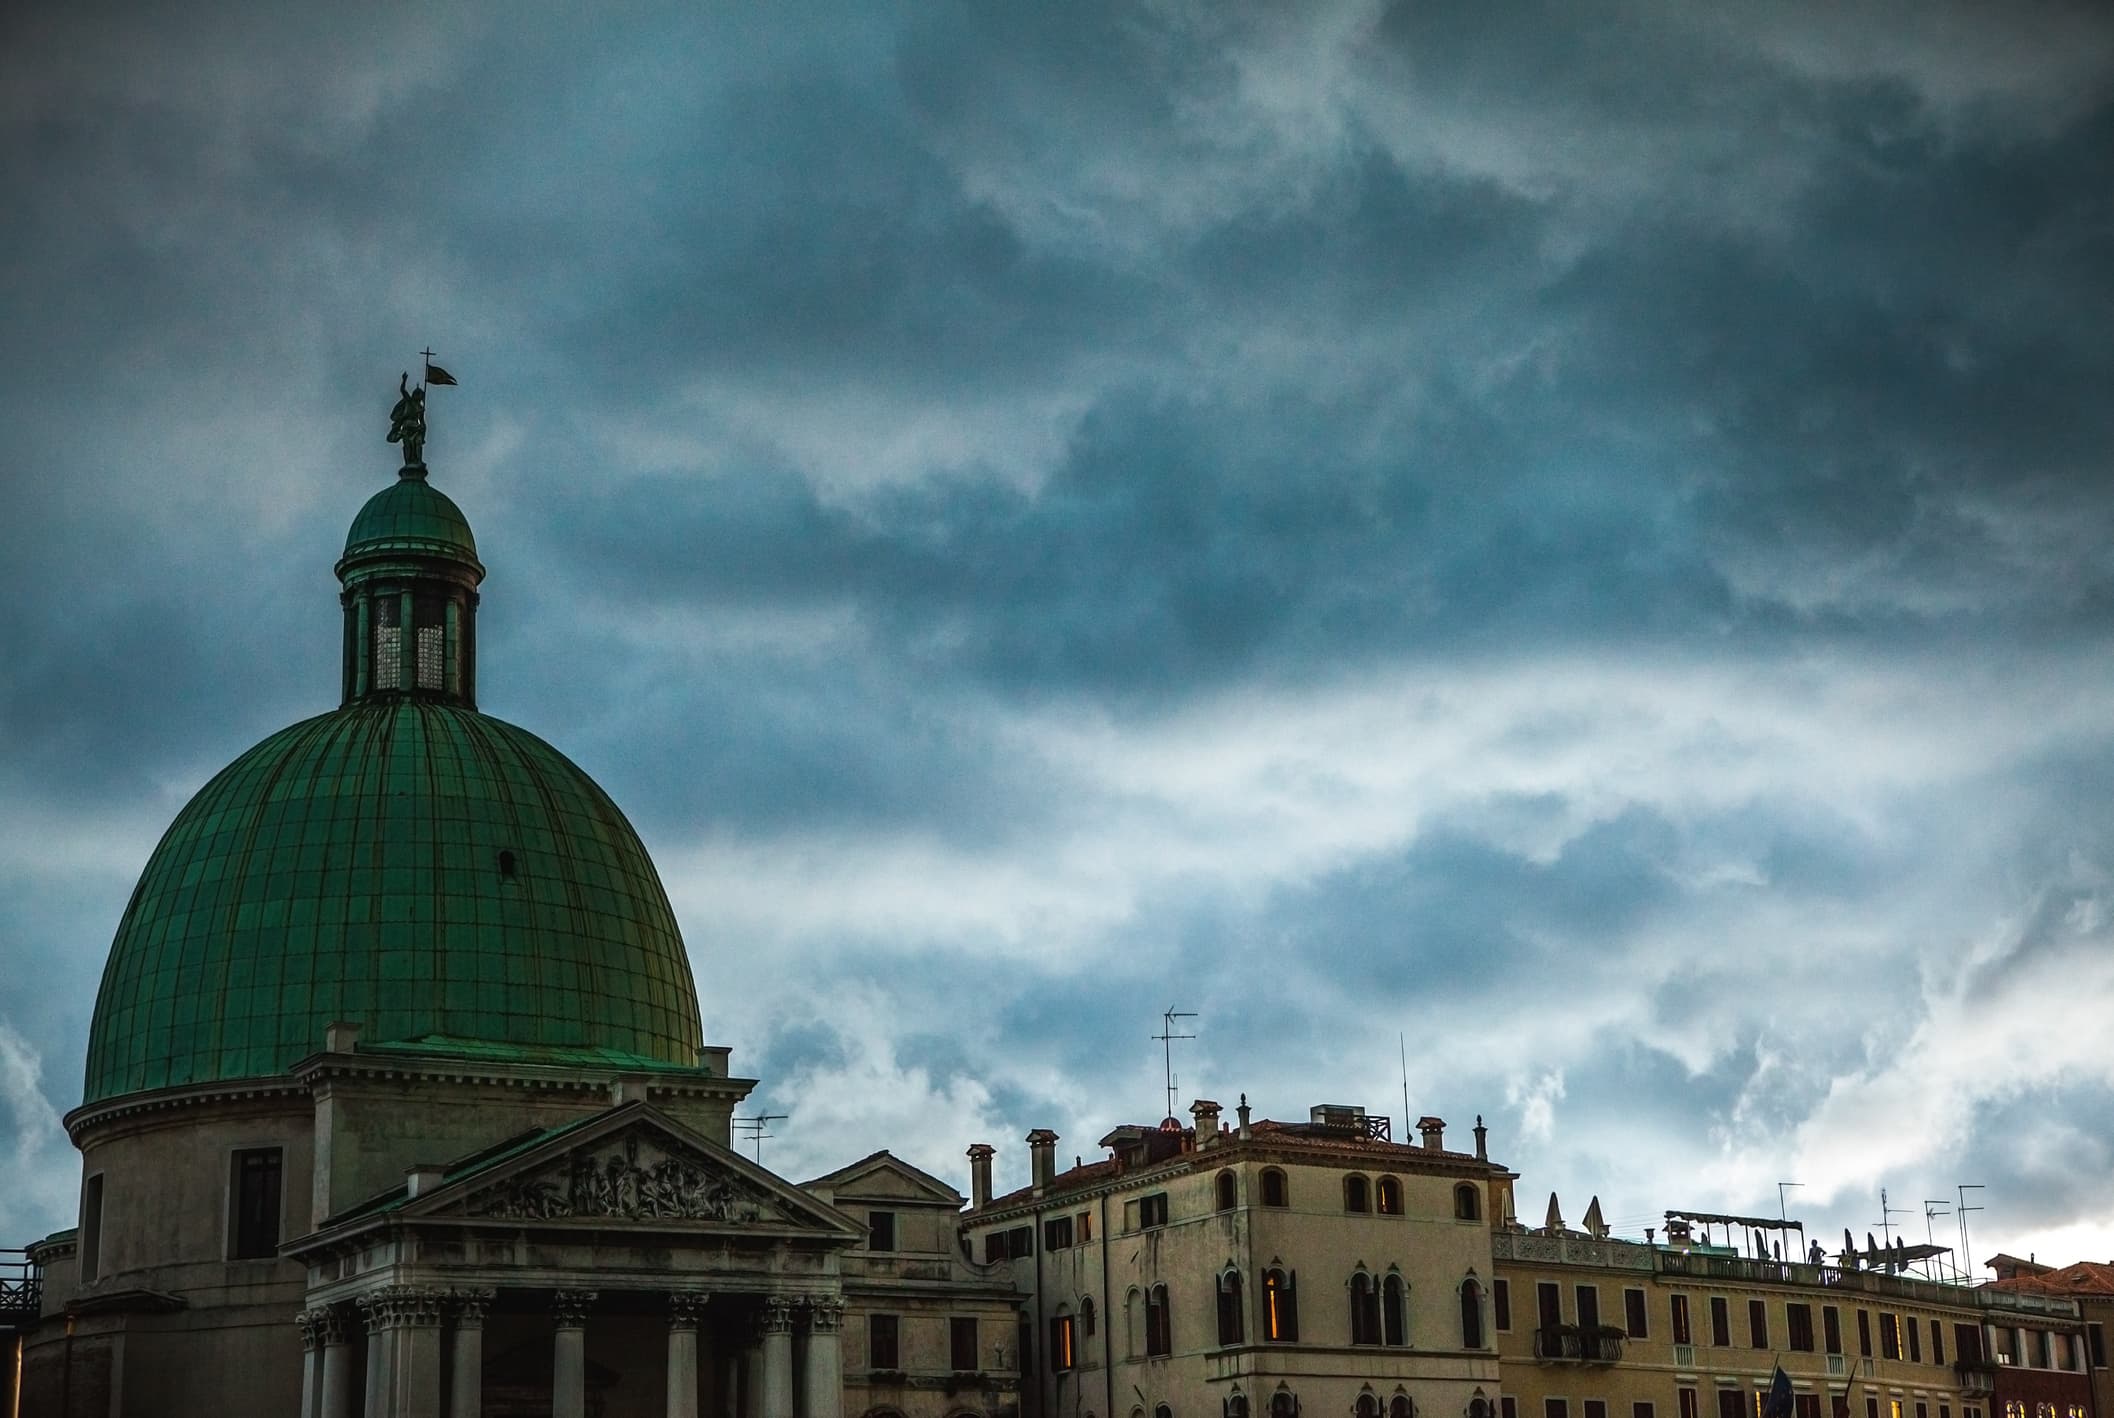 A dome in Venice with storm clouds gathering behind it.